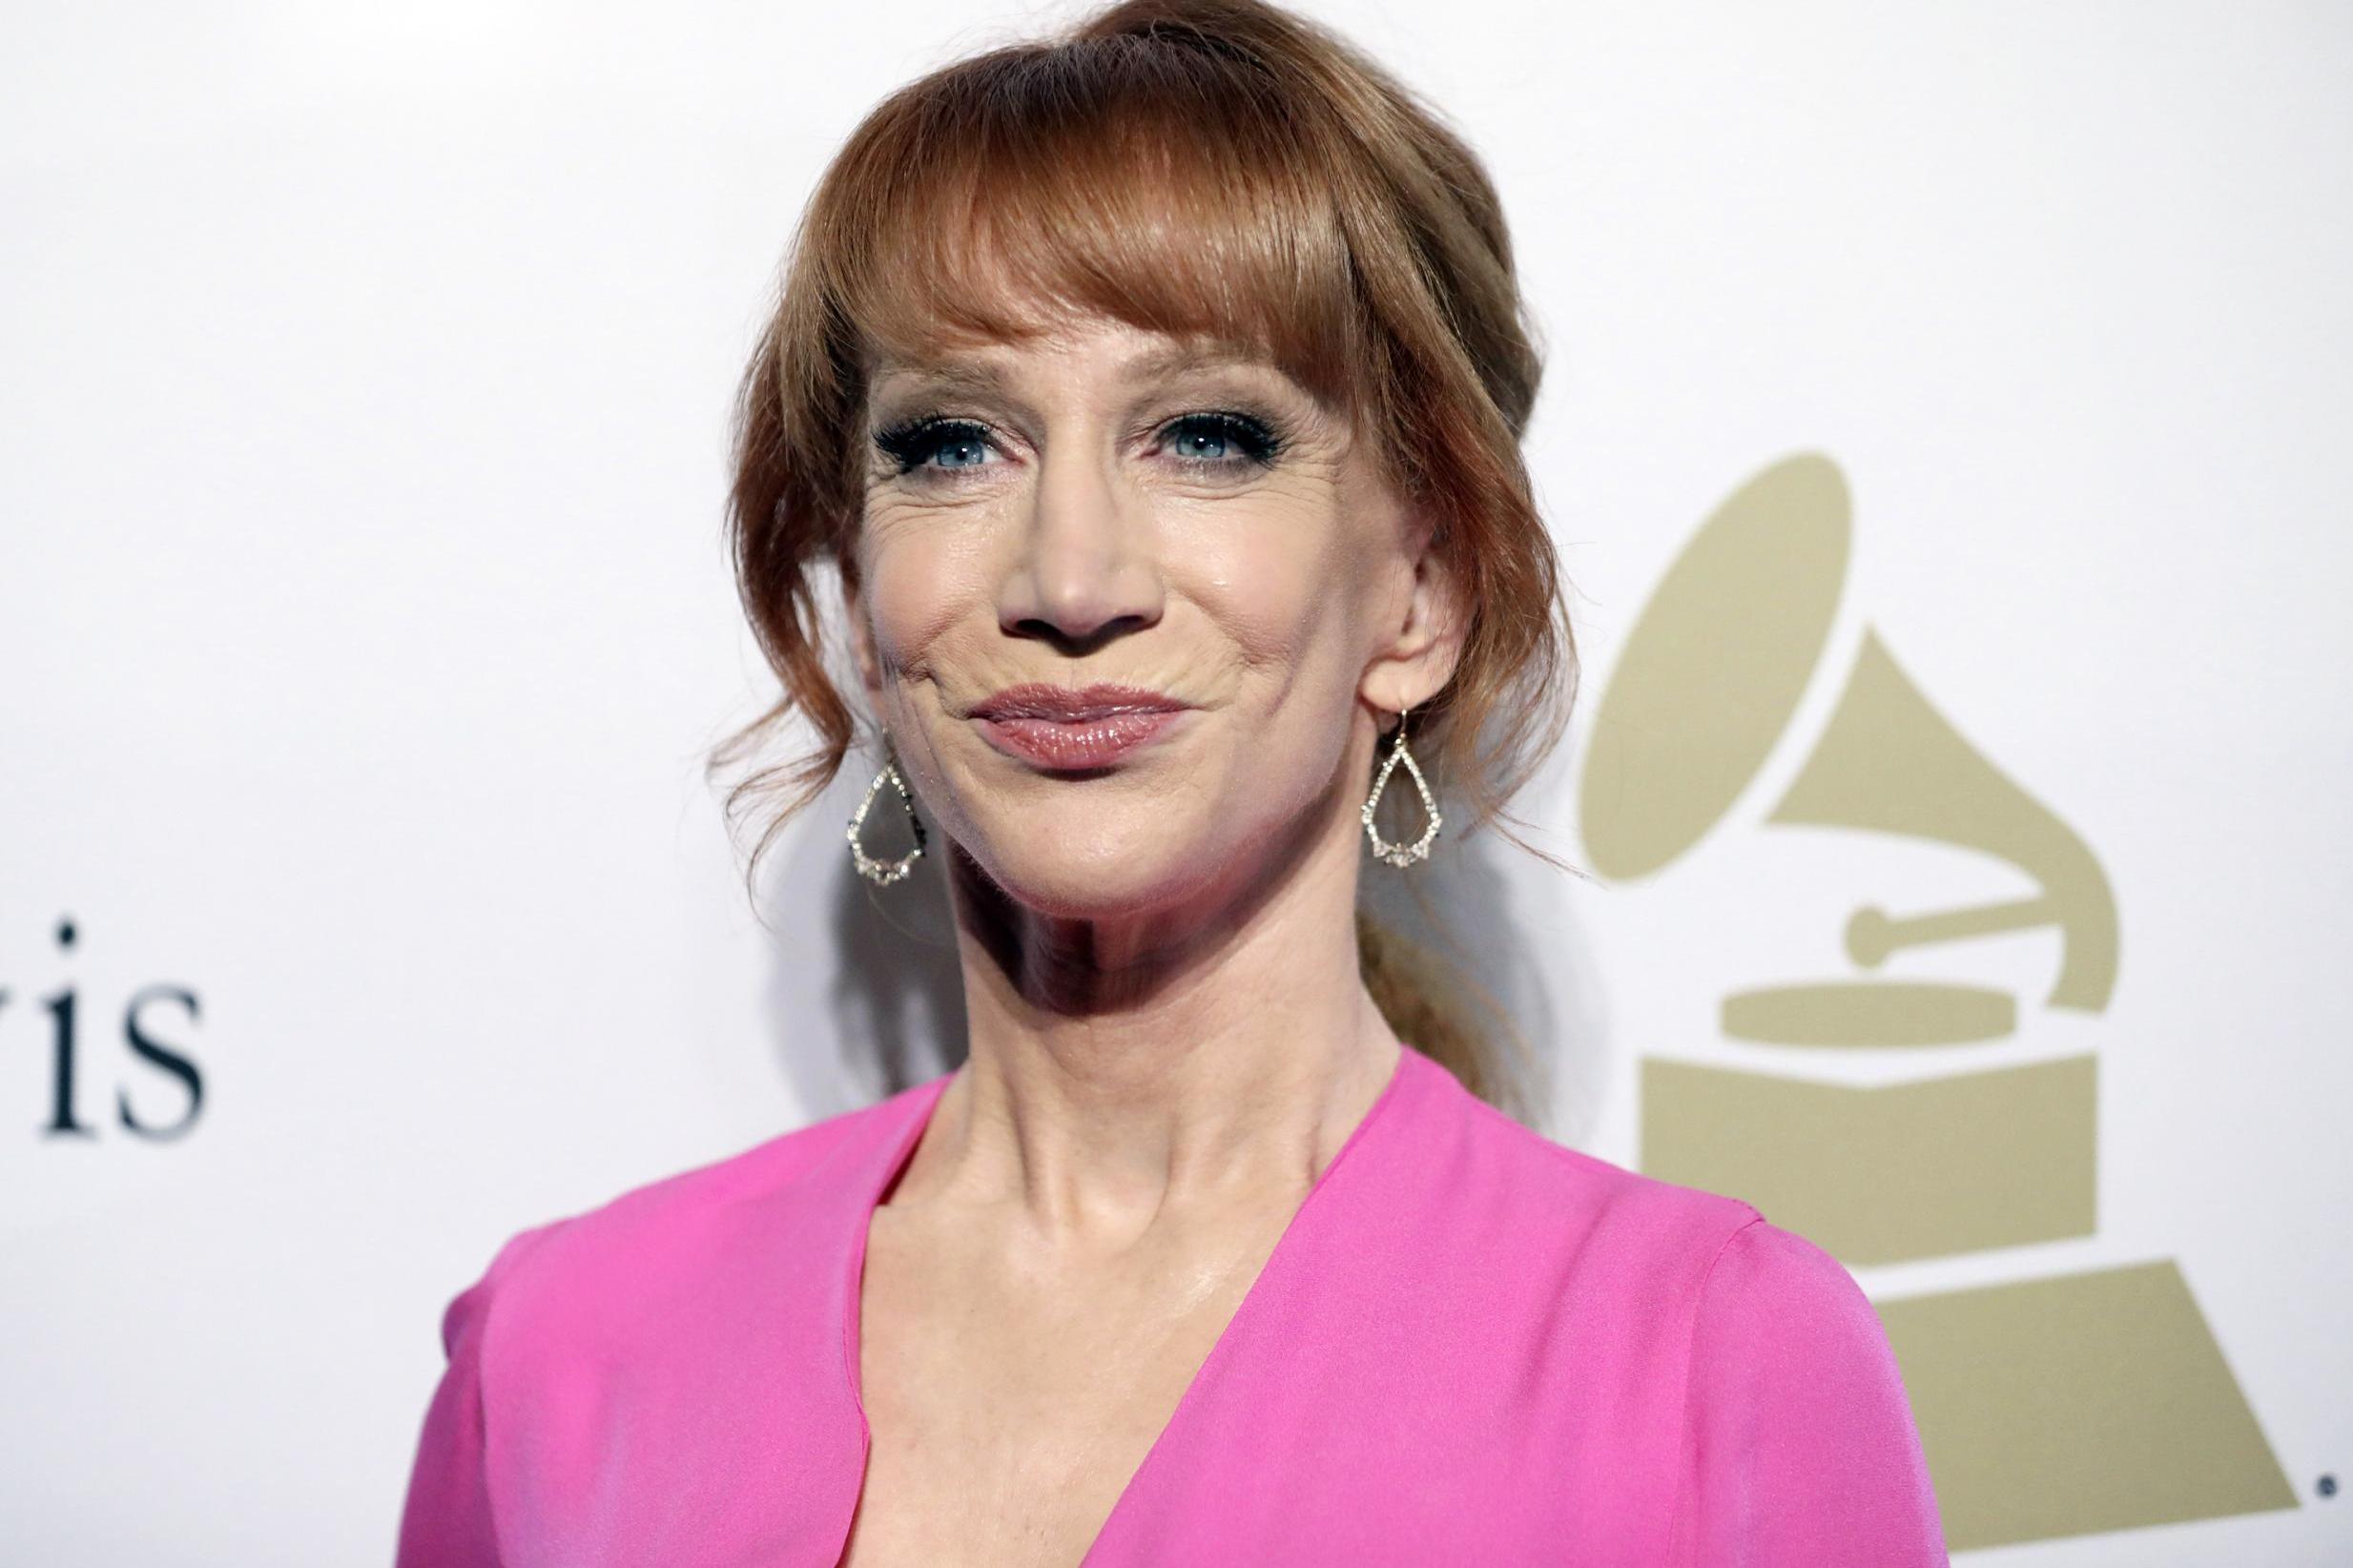 US comedian Kathy Griffin 'exonerated' after Secret Service probe